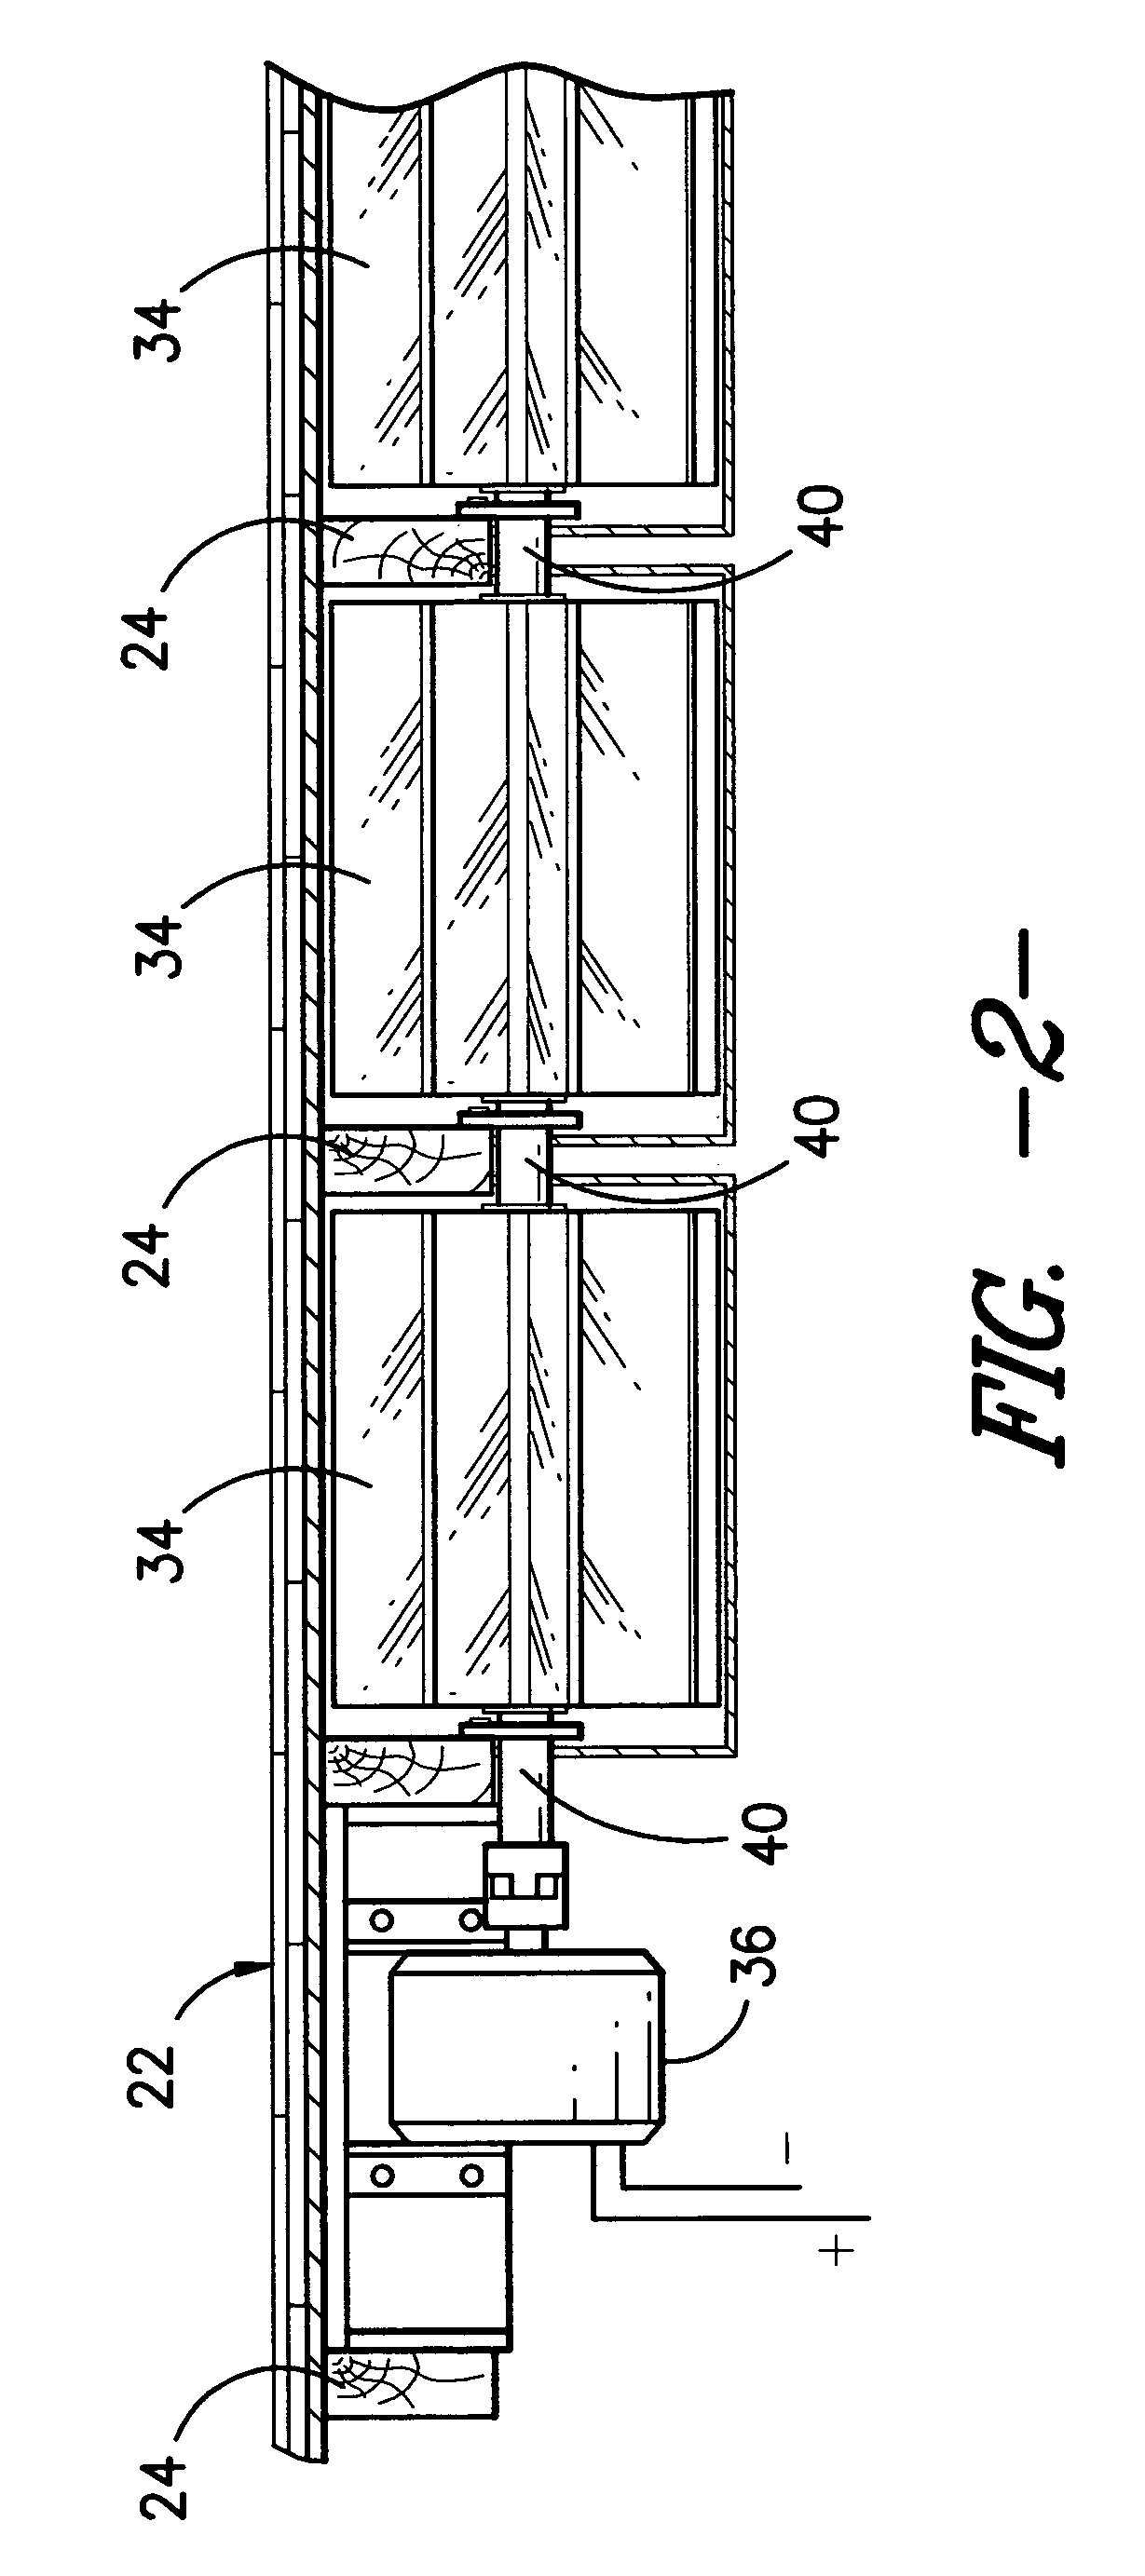 Insulation and power generation system for buildings